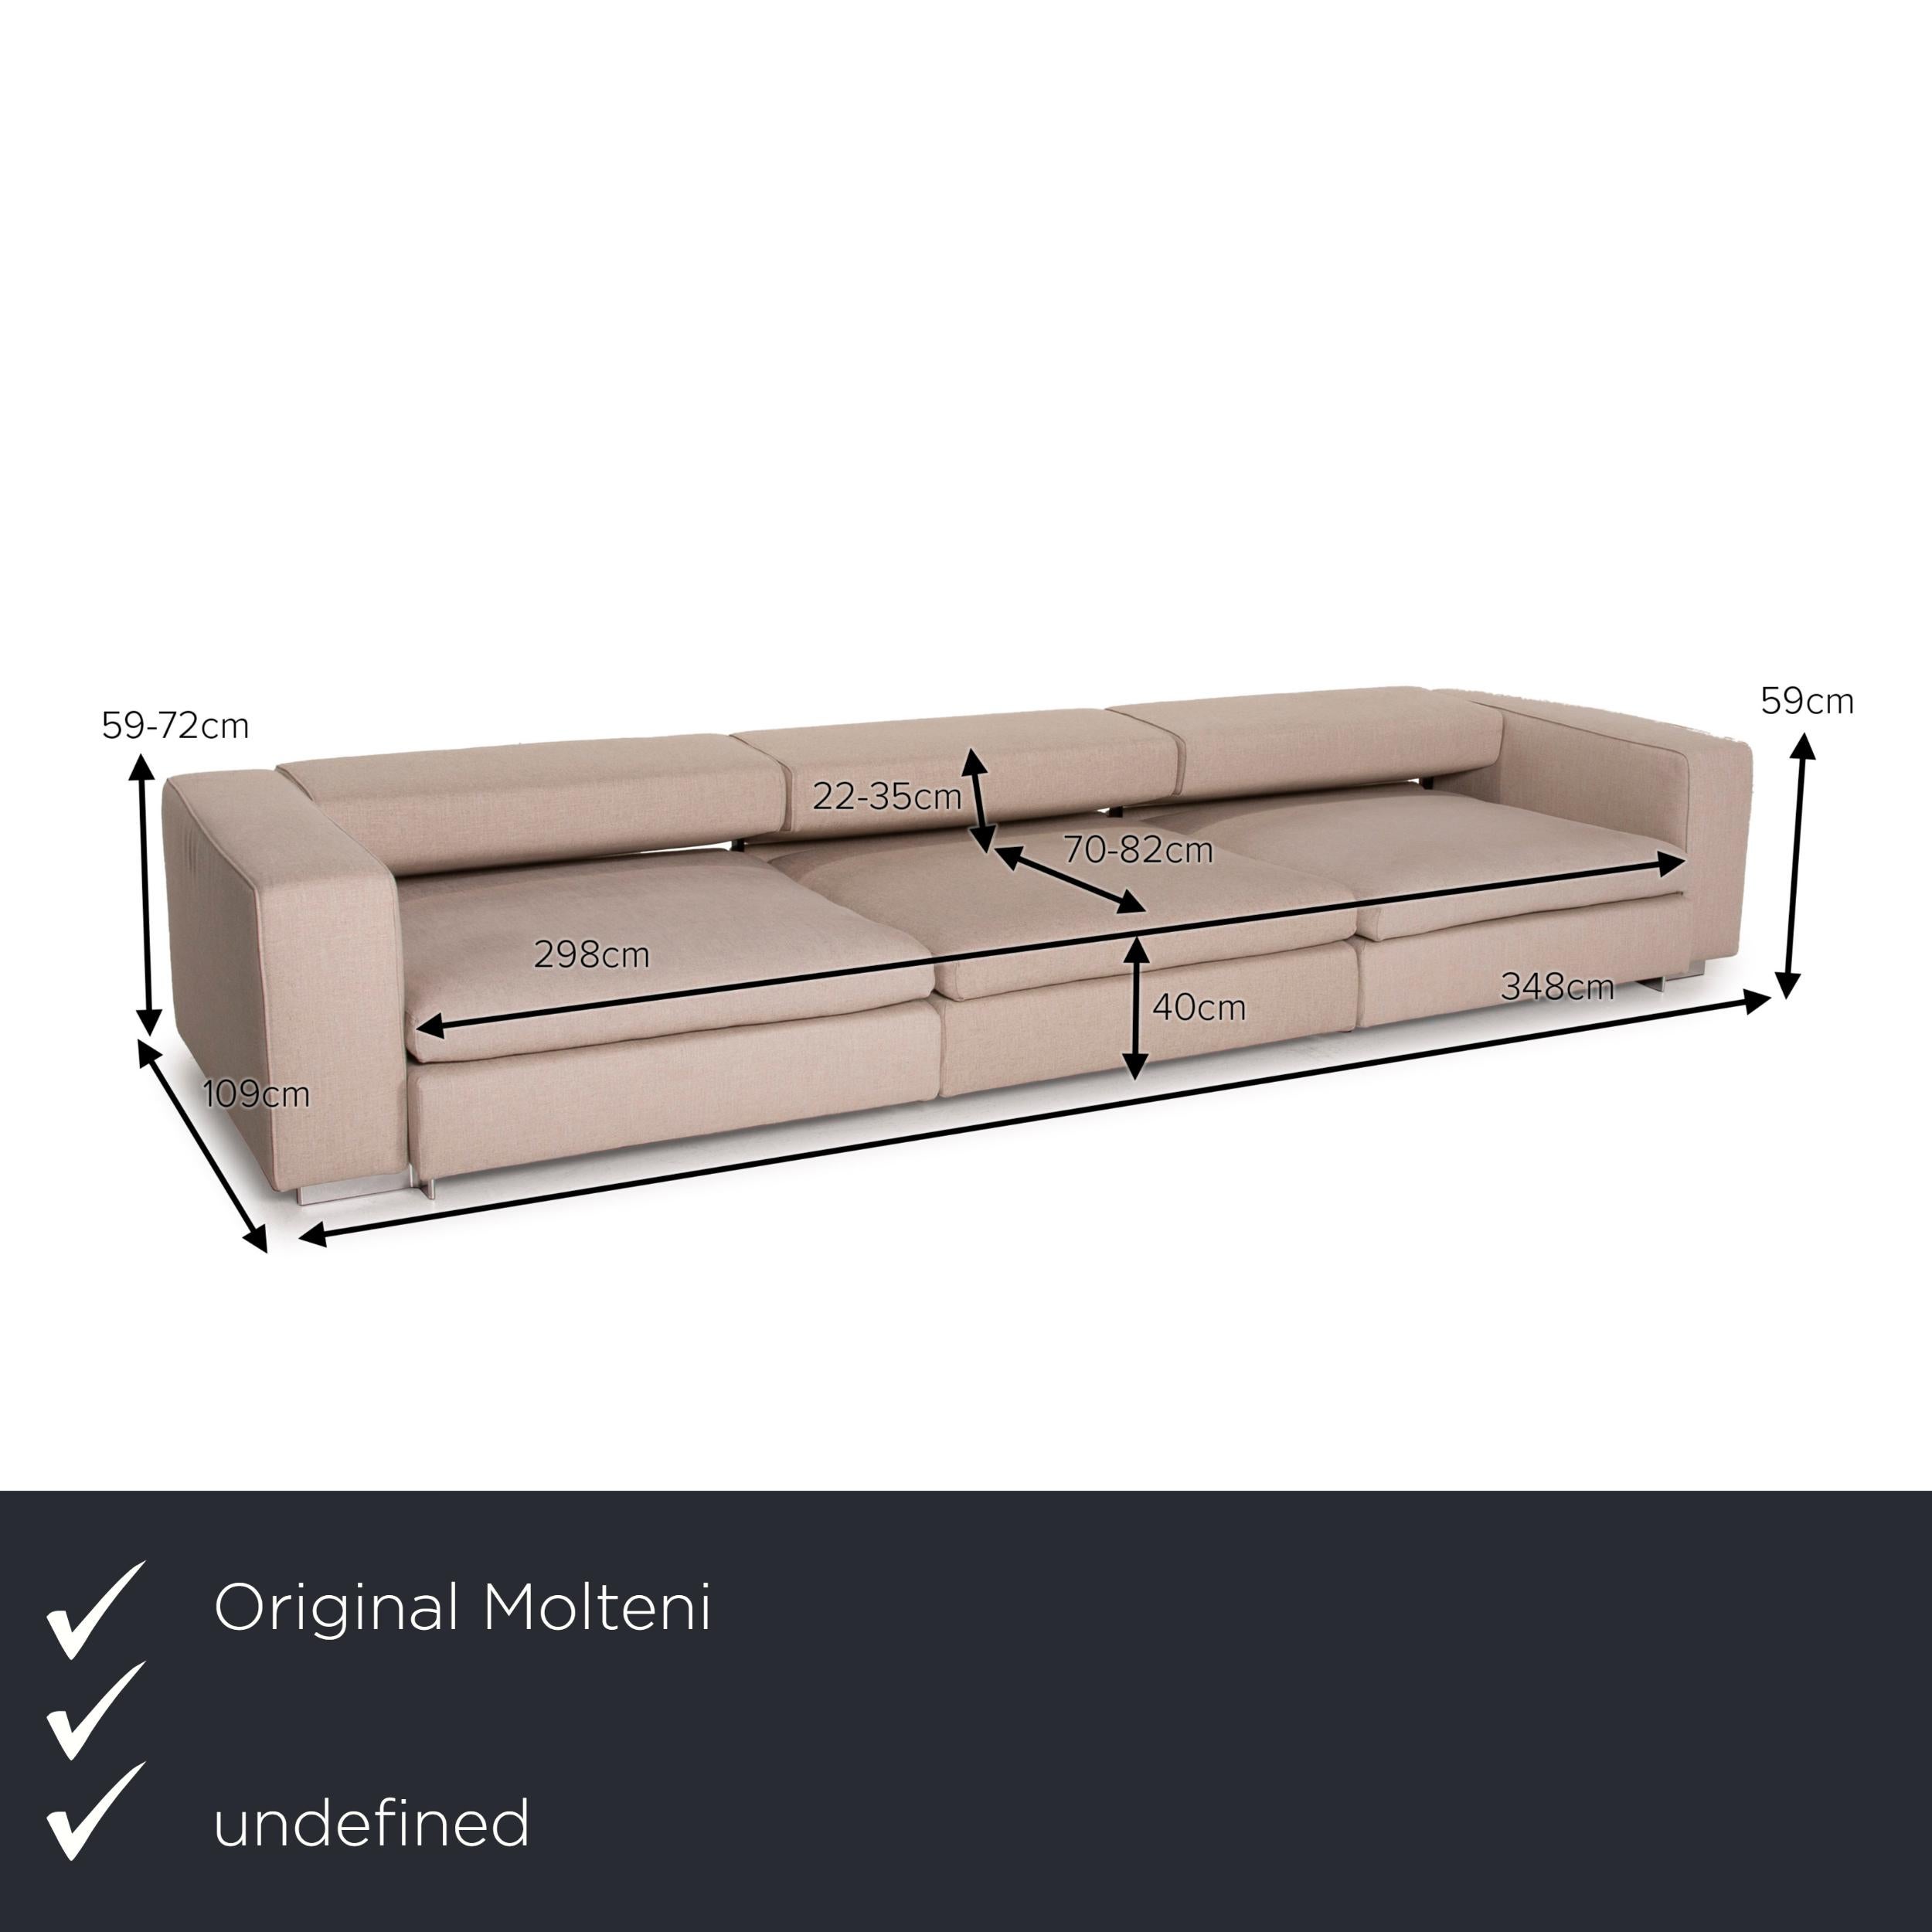 We present to you a Molteni Turner fabric sofa set beige 1x three-seater 1x two-seater function.
 

 Product measurements in centimeters:
 

Depth: 109
Width: 348
Height: 59
Seat height: 40
Rest height: 59
Seat depth: 70
Seat width: